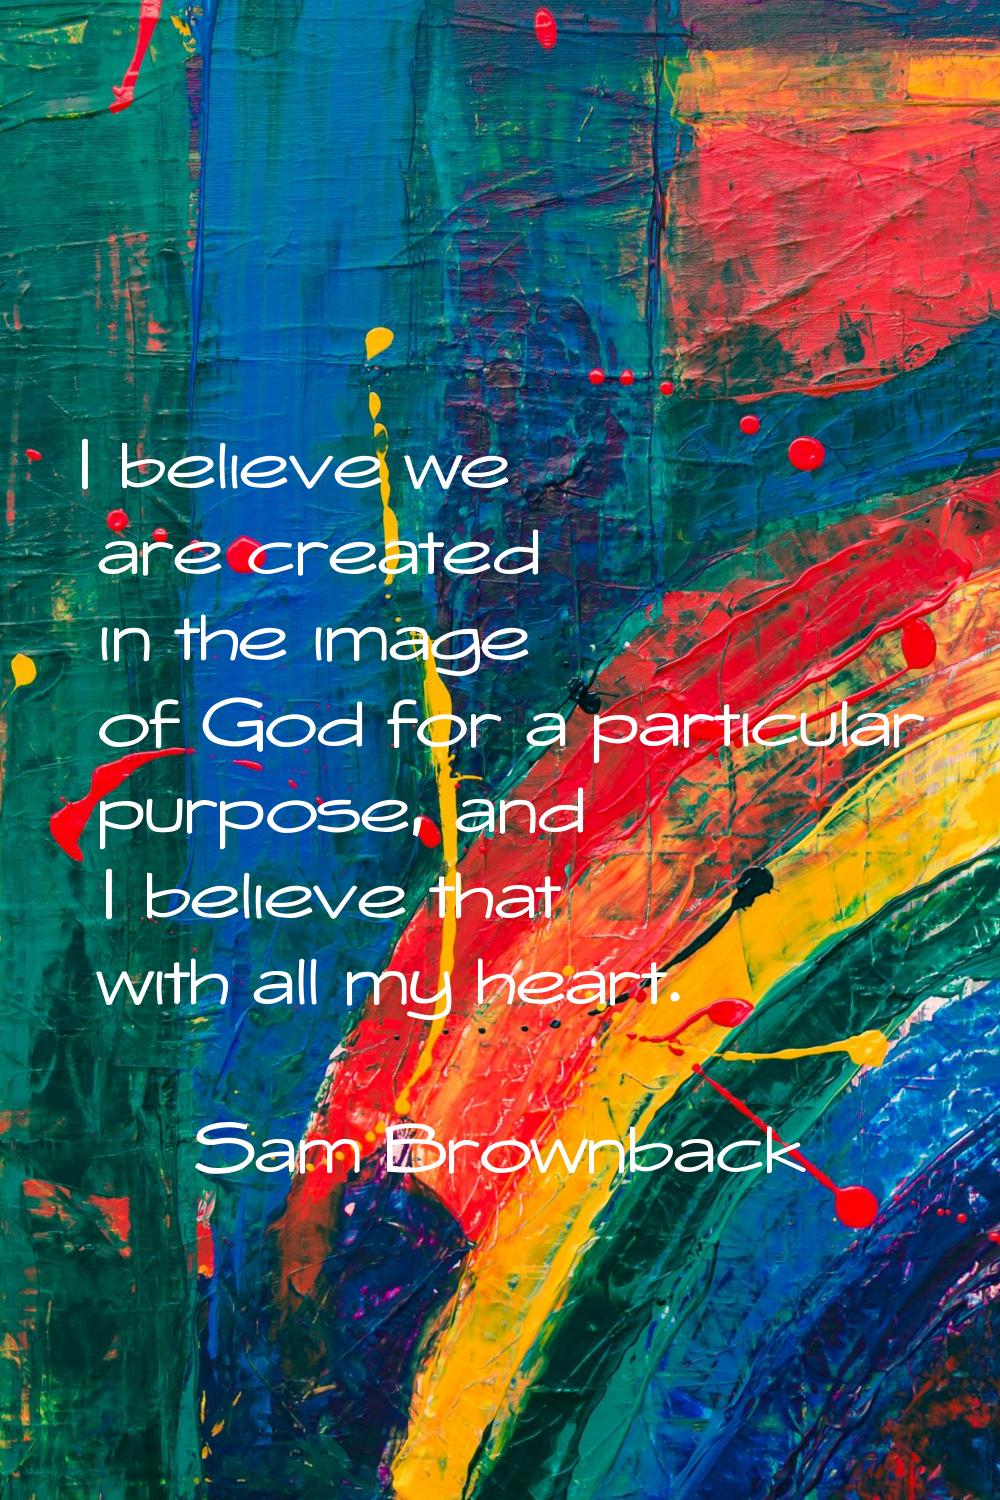 I believe we are created in the image of God for a particular purpose, and I believe that with all 